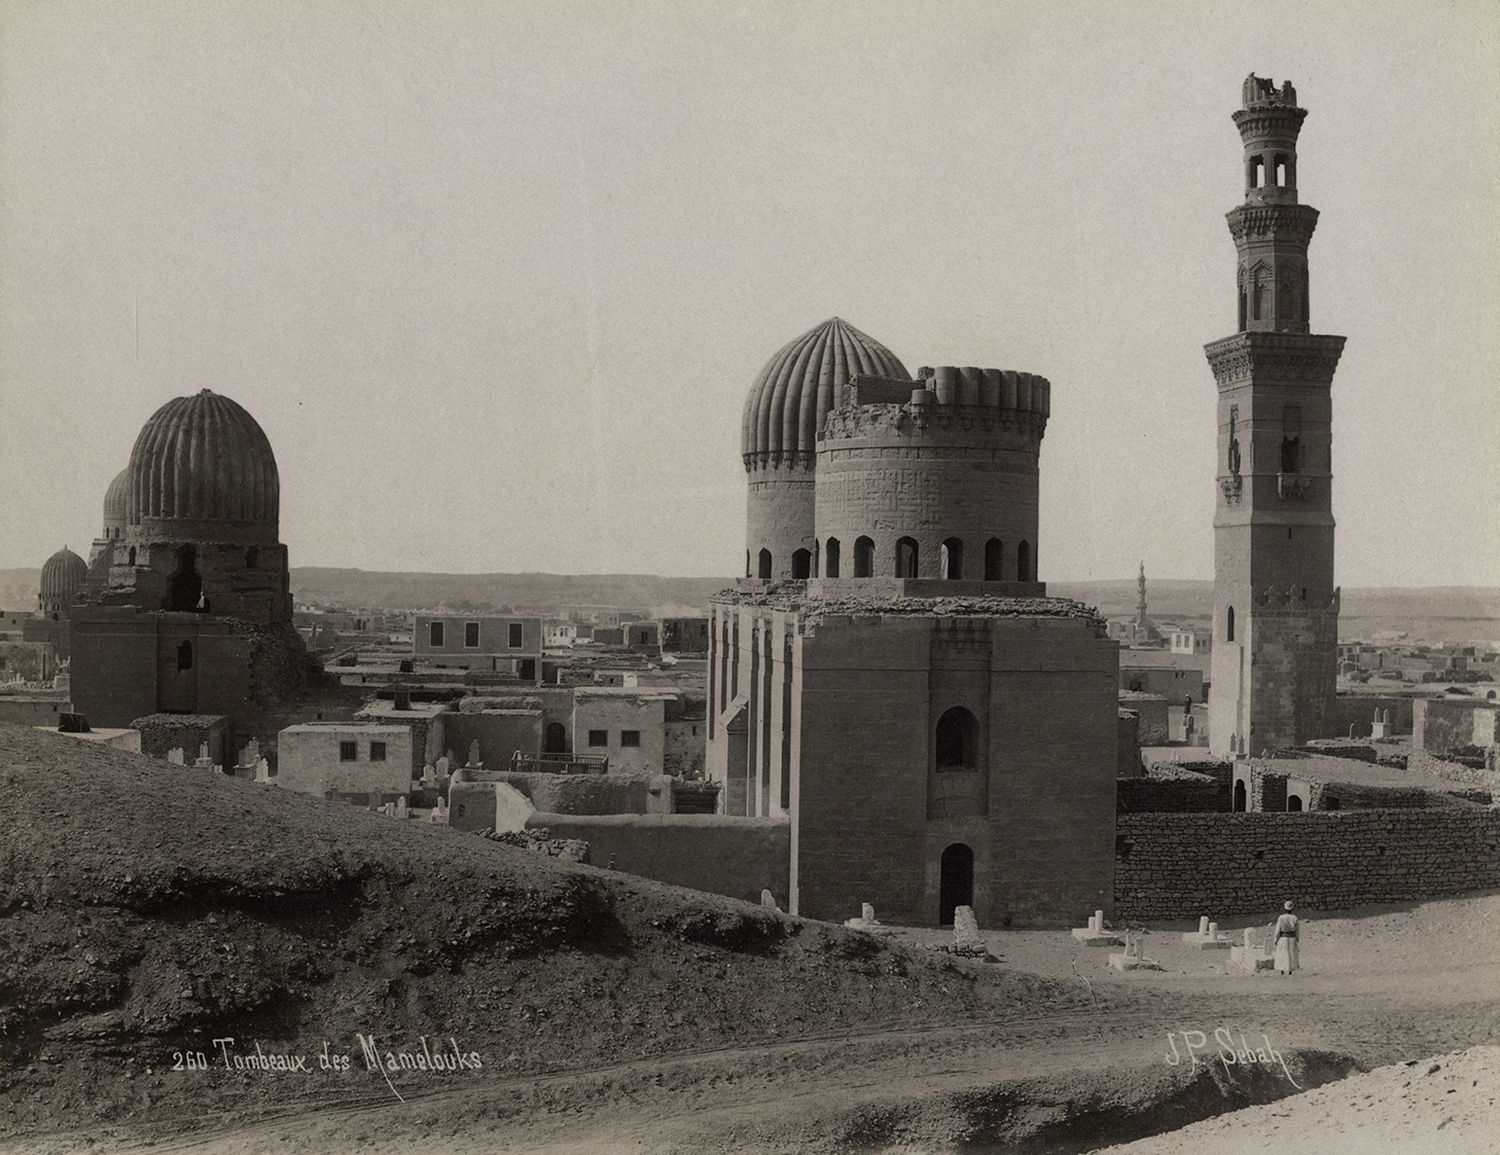 View of monuments in Cairo's Southern Cemetery. The Qubba al-Sultaniyya is visible in foreground, and the tomb of Amir Qawsun is visible at left.